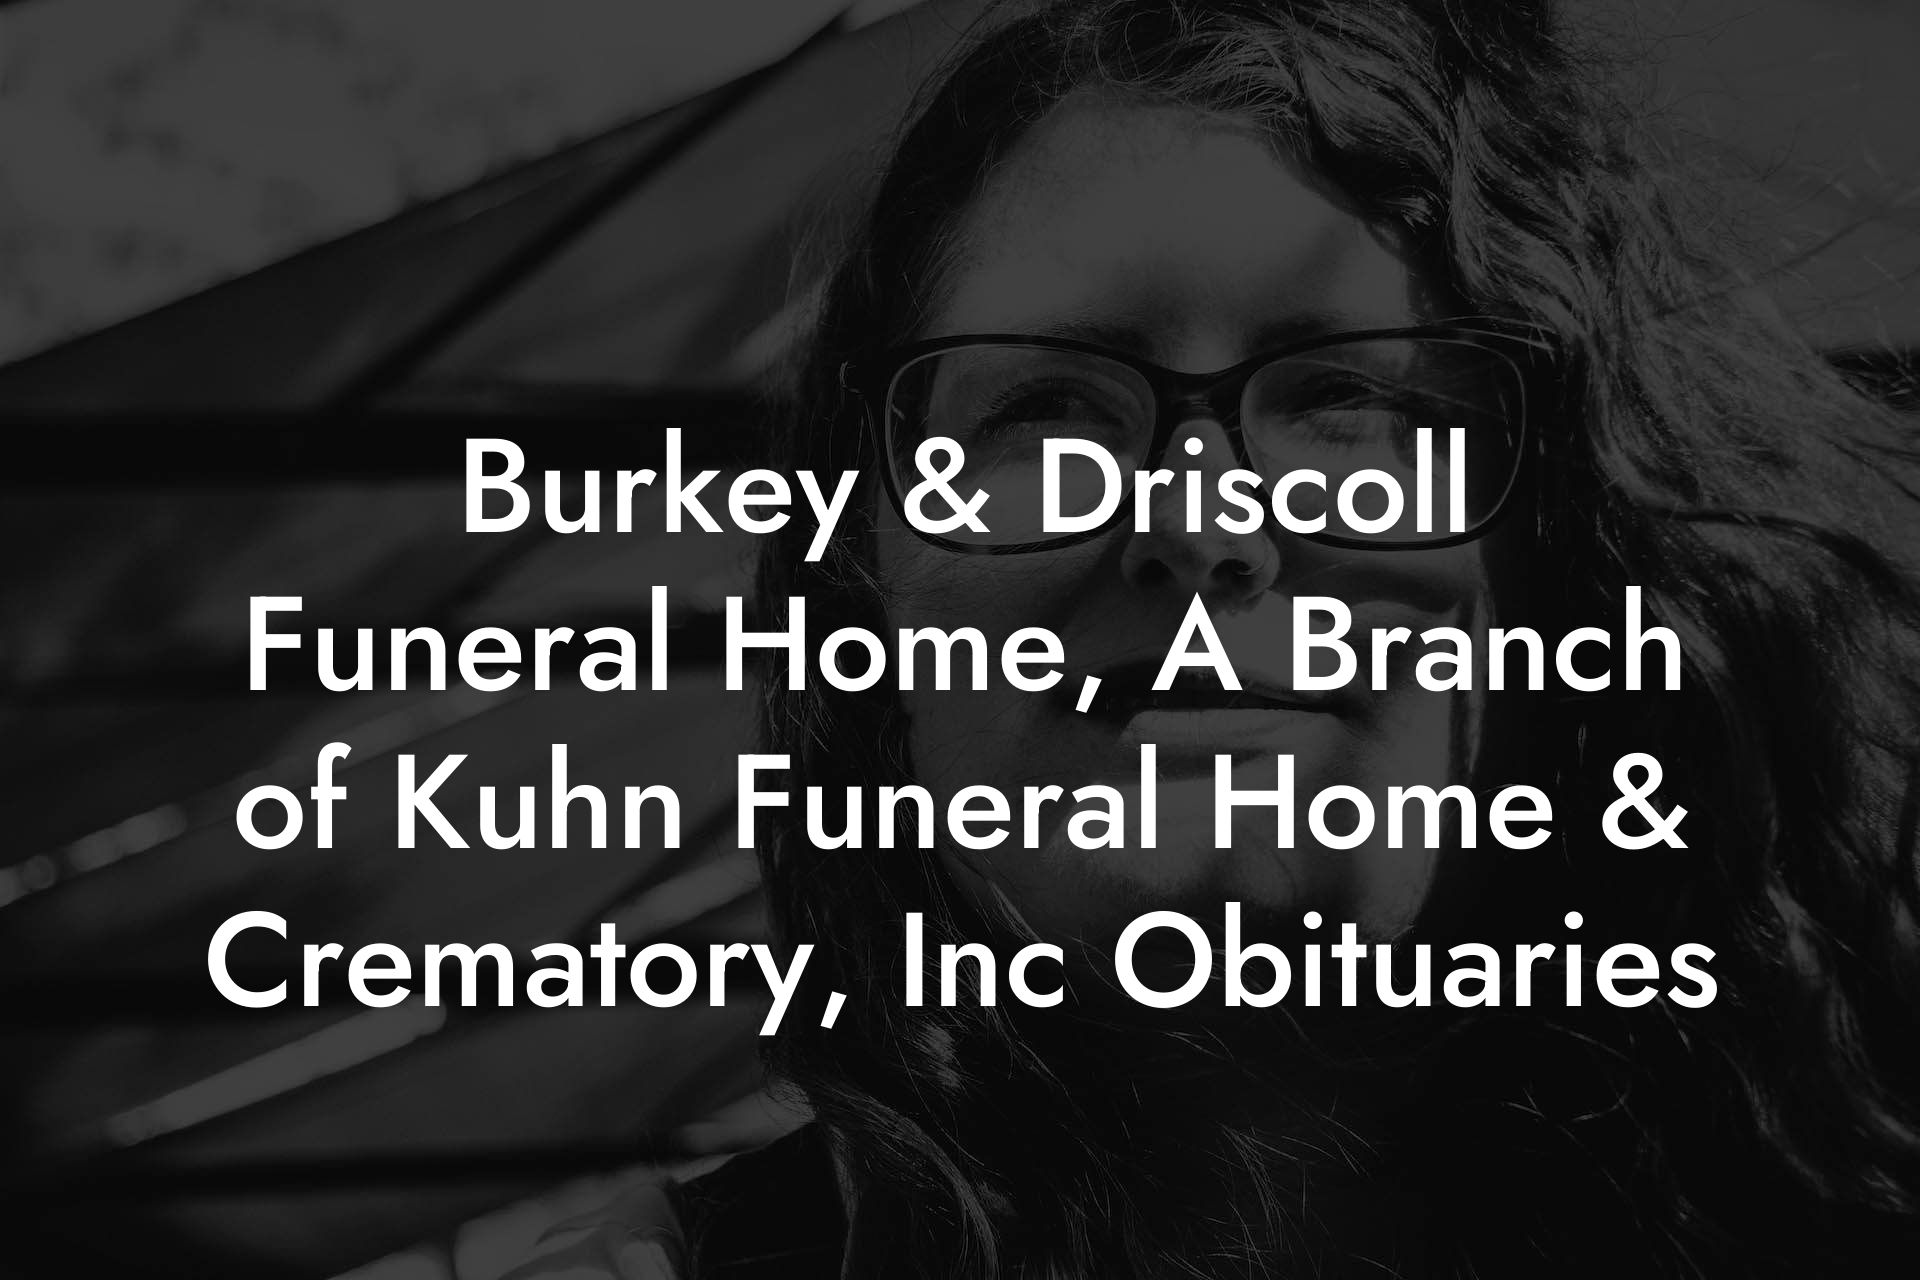 Burkey & Driscoll Funeral Home, a Branch of Kuhn Funeral Home & Crematory, Inc. Obituaries